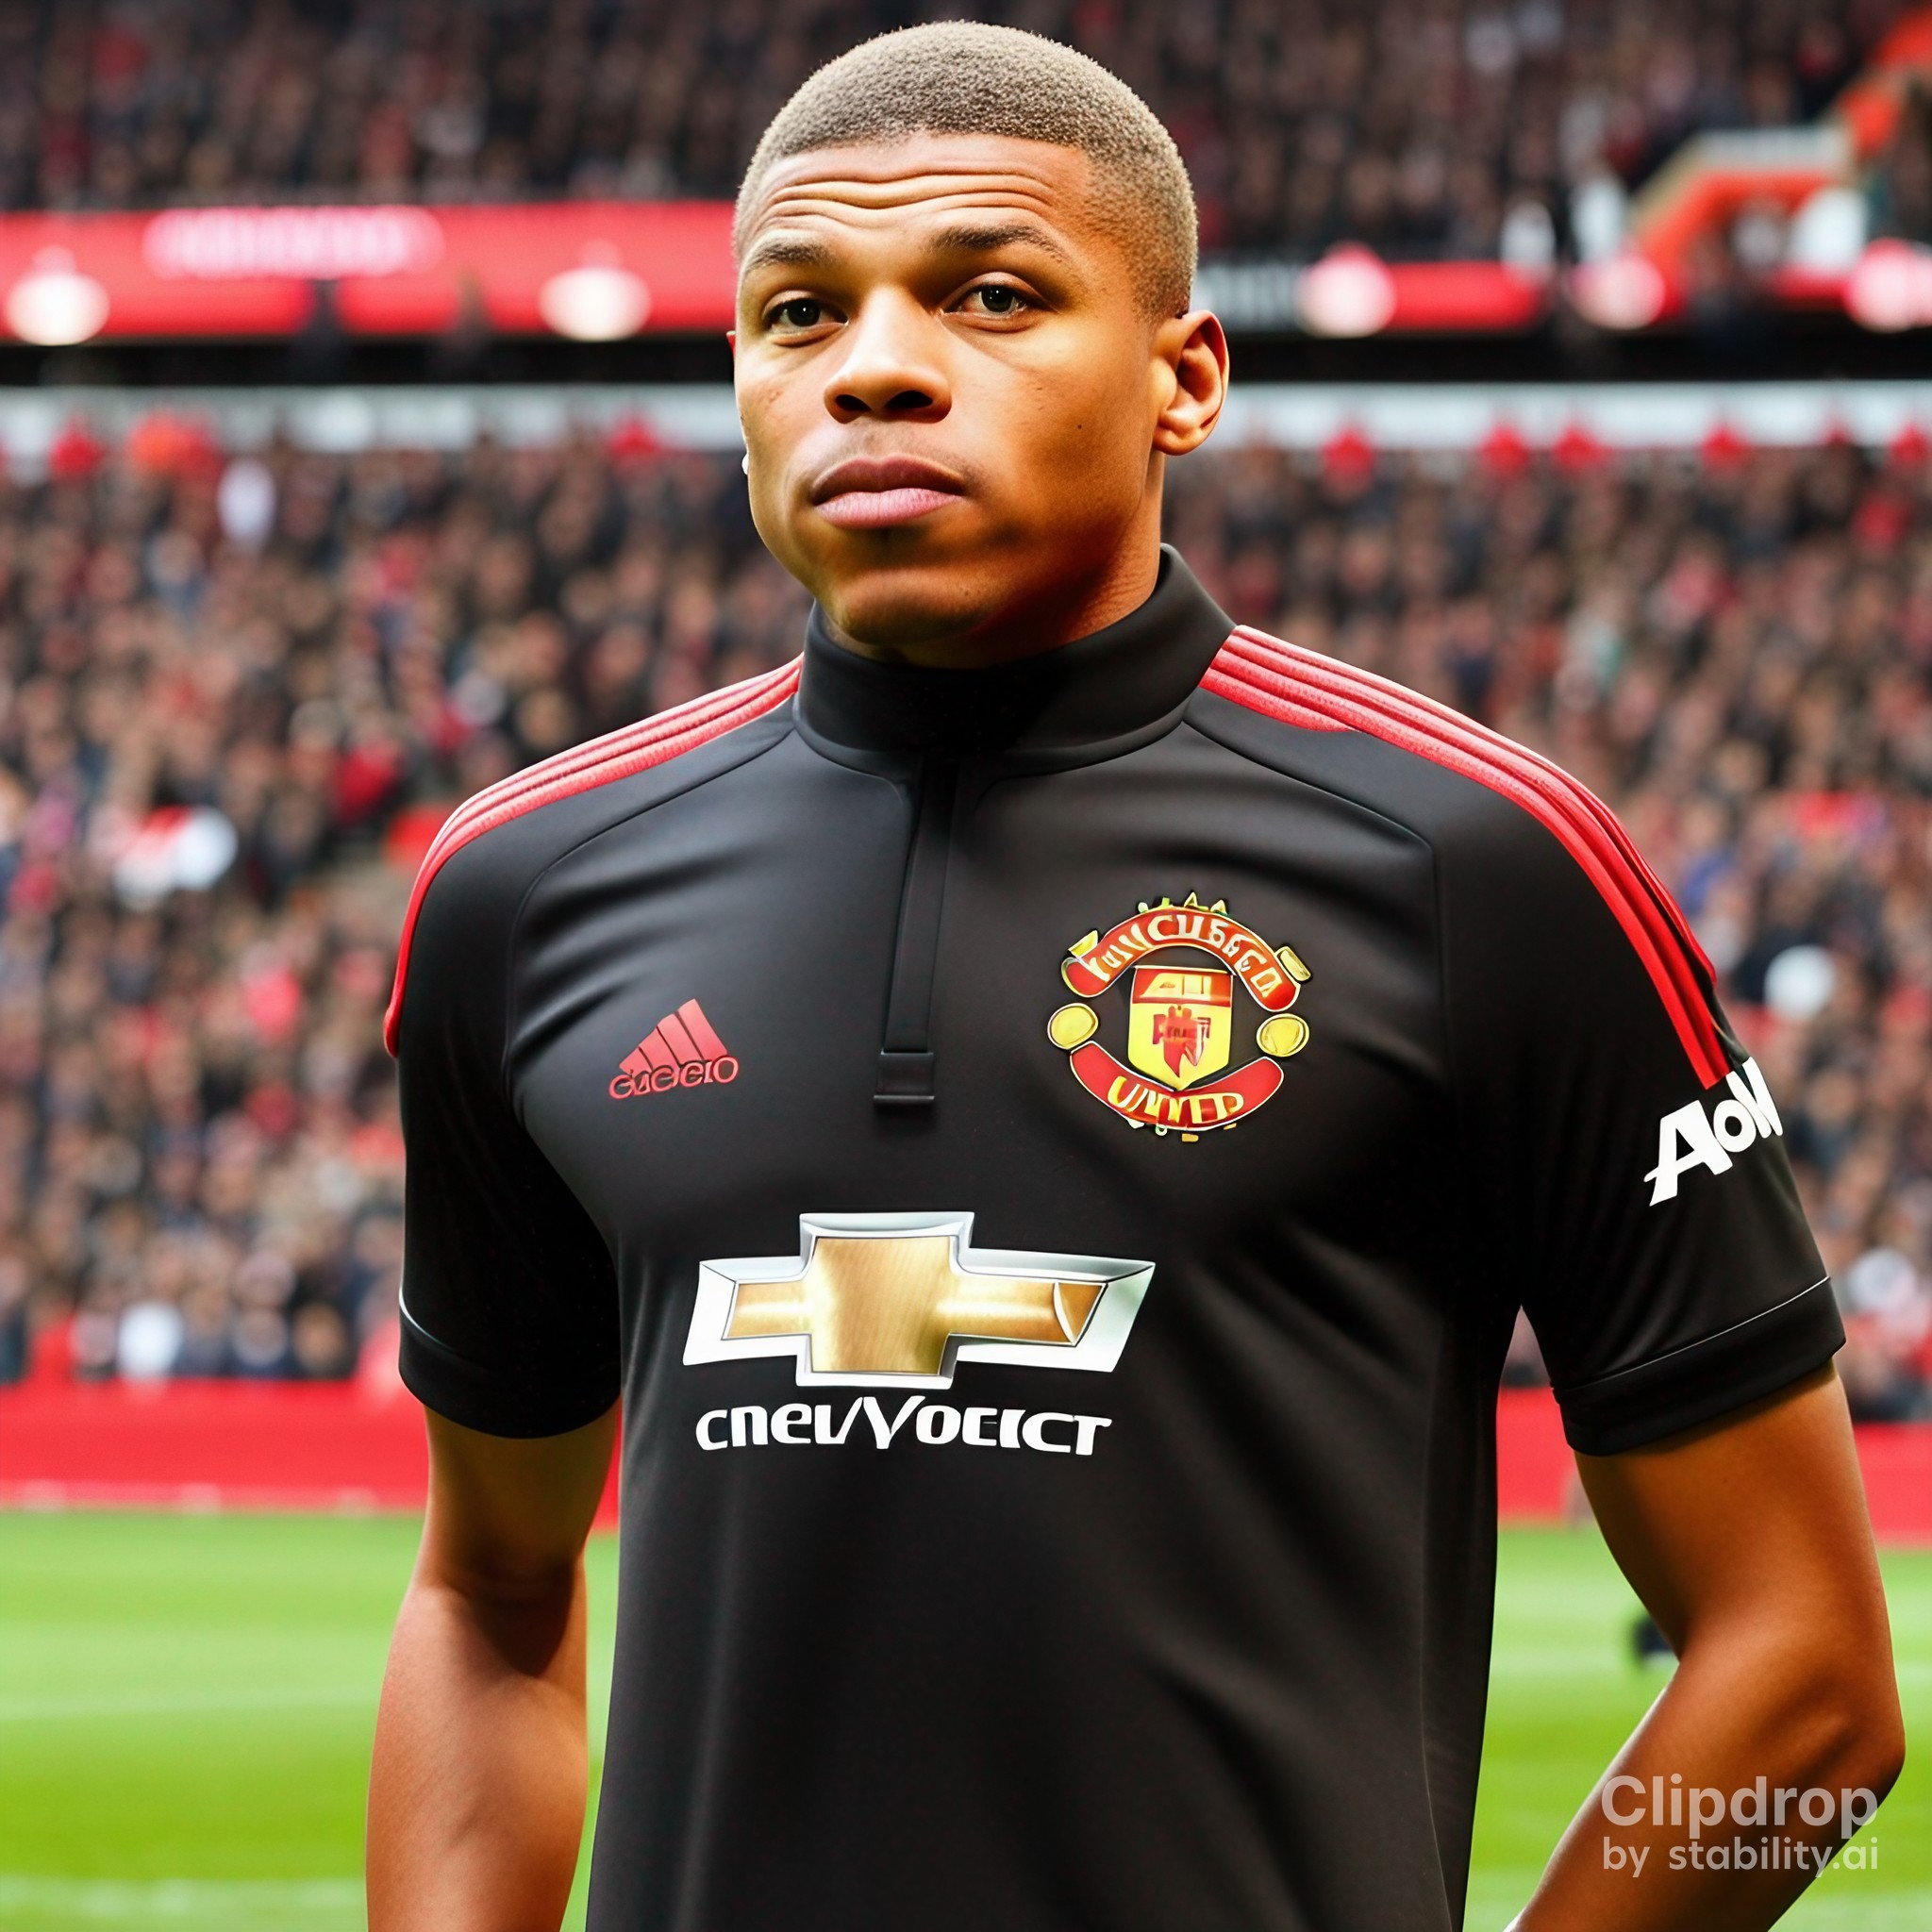 You are currently viewing Mbappe in man utd shirt